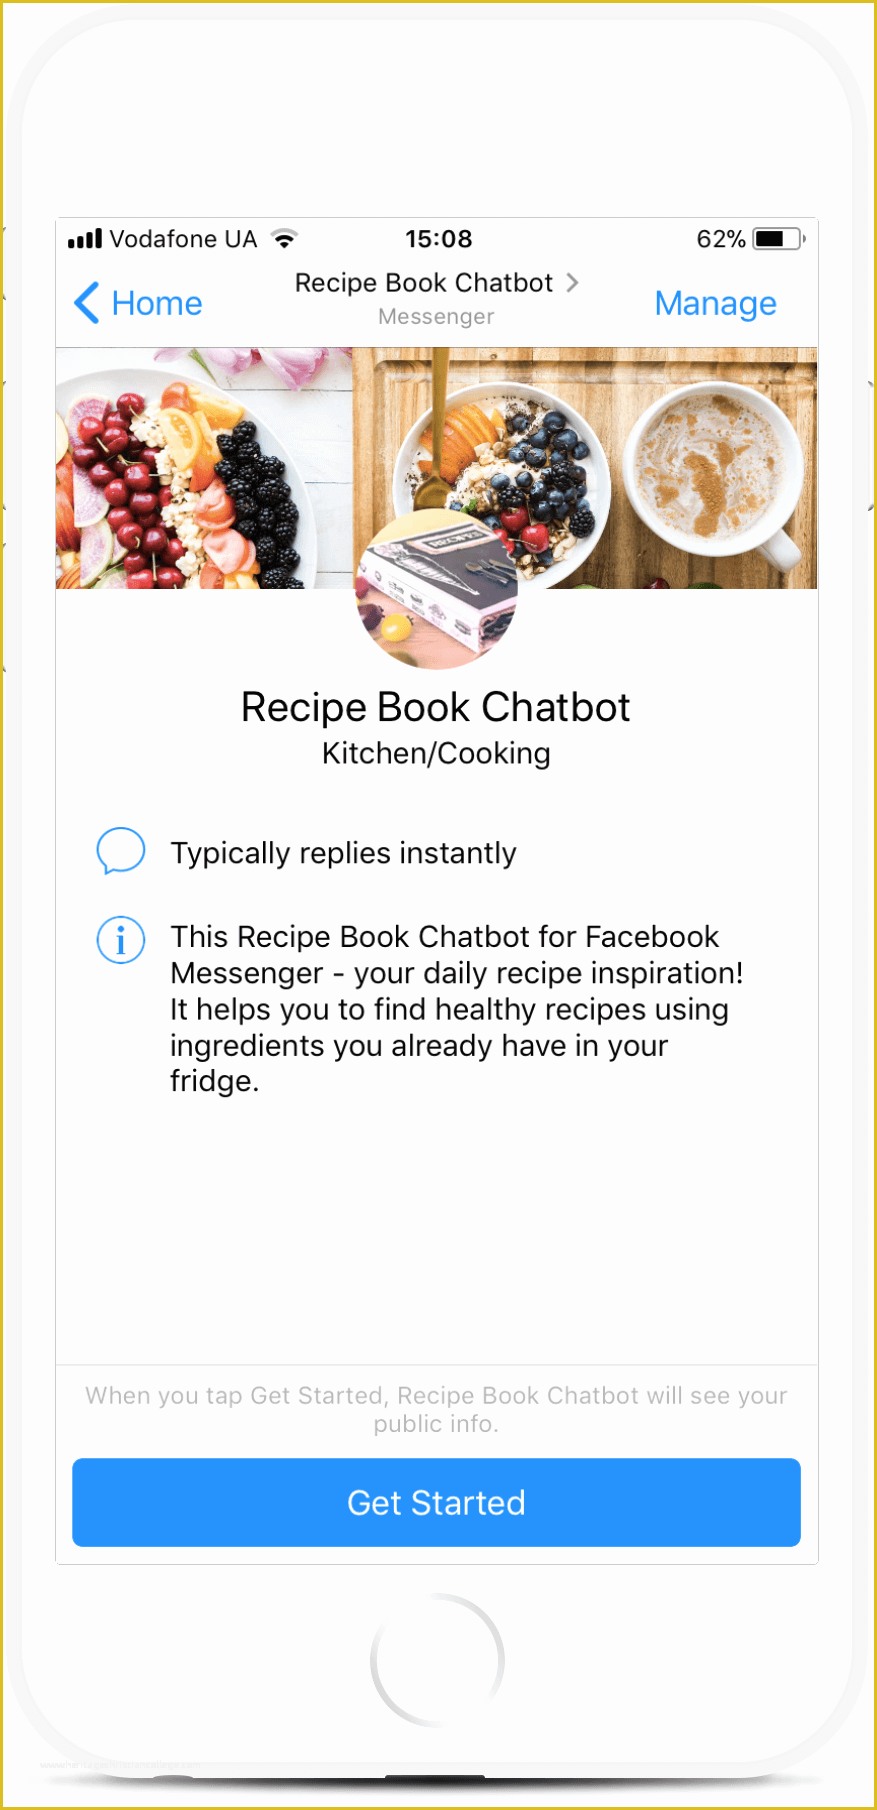 Free Recipe Blog Templates Of Recipe Book Chatbot Template for Food Blogs for $69